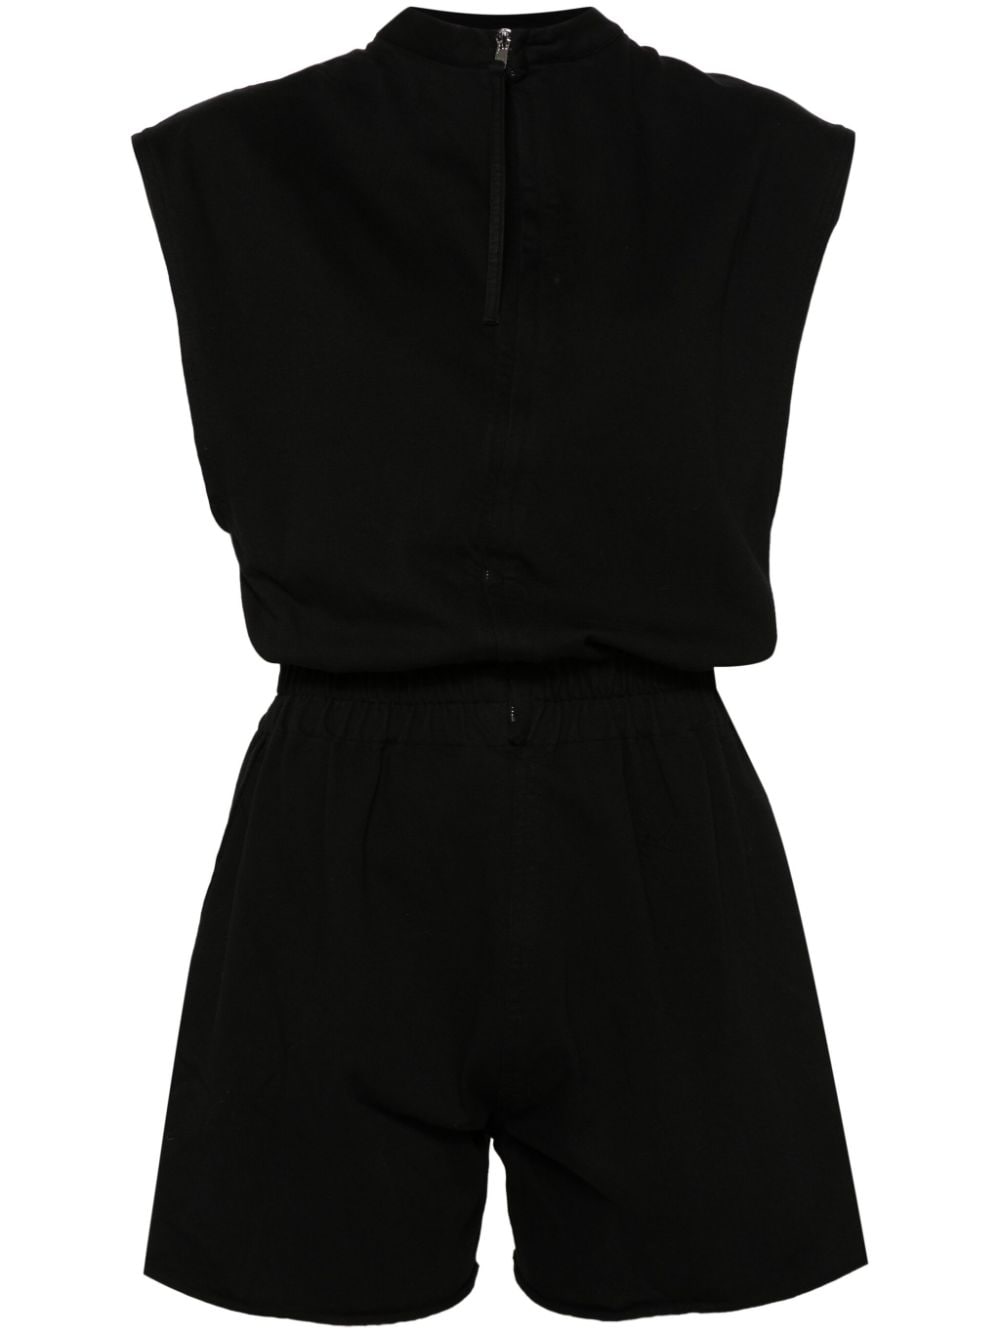 RICK OWENS Organic Cotton Black Jumpsuit with Raw Edges and Side Slits for Women